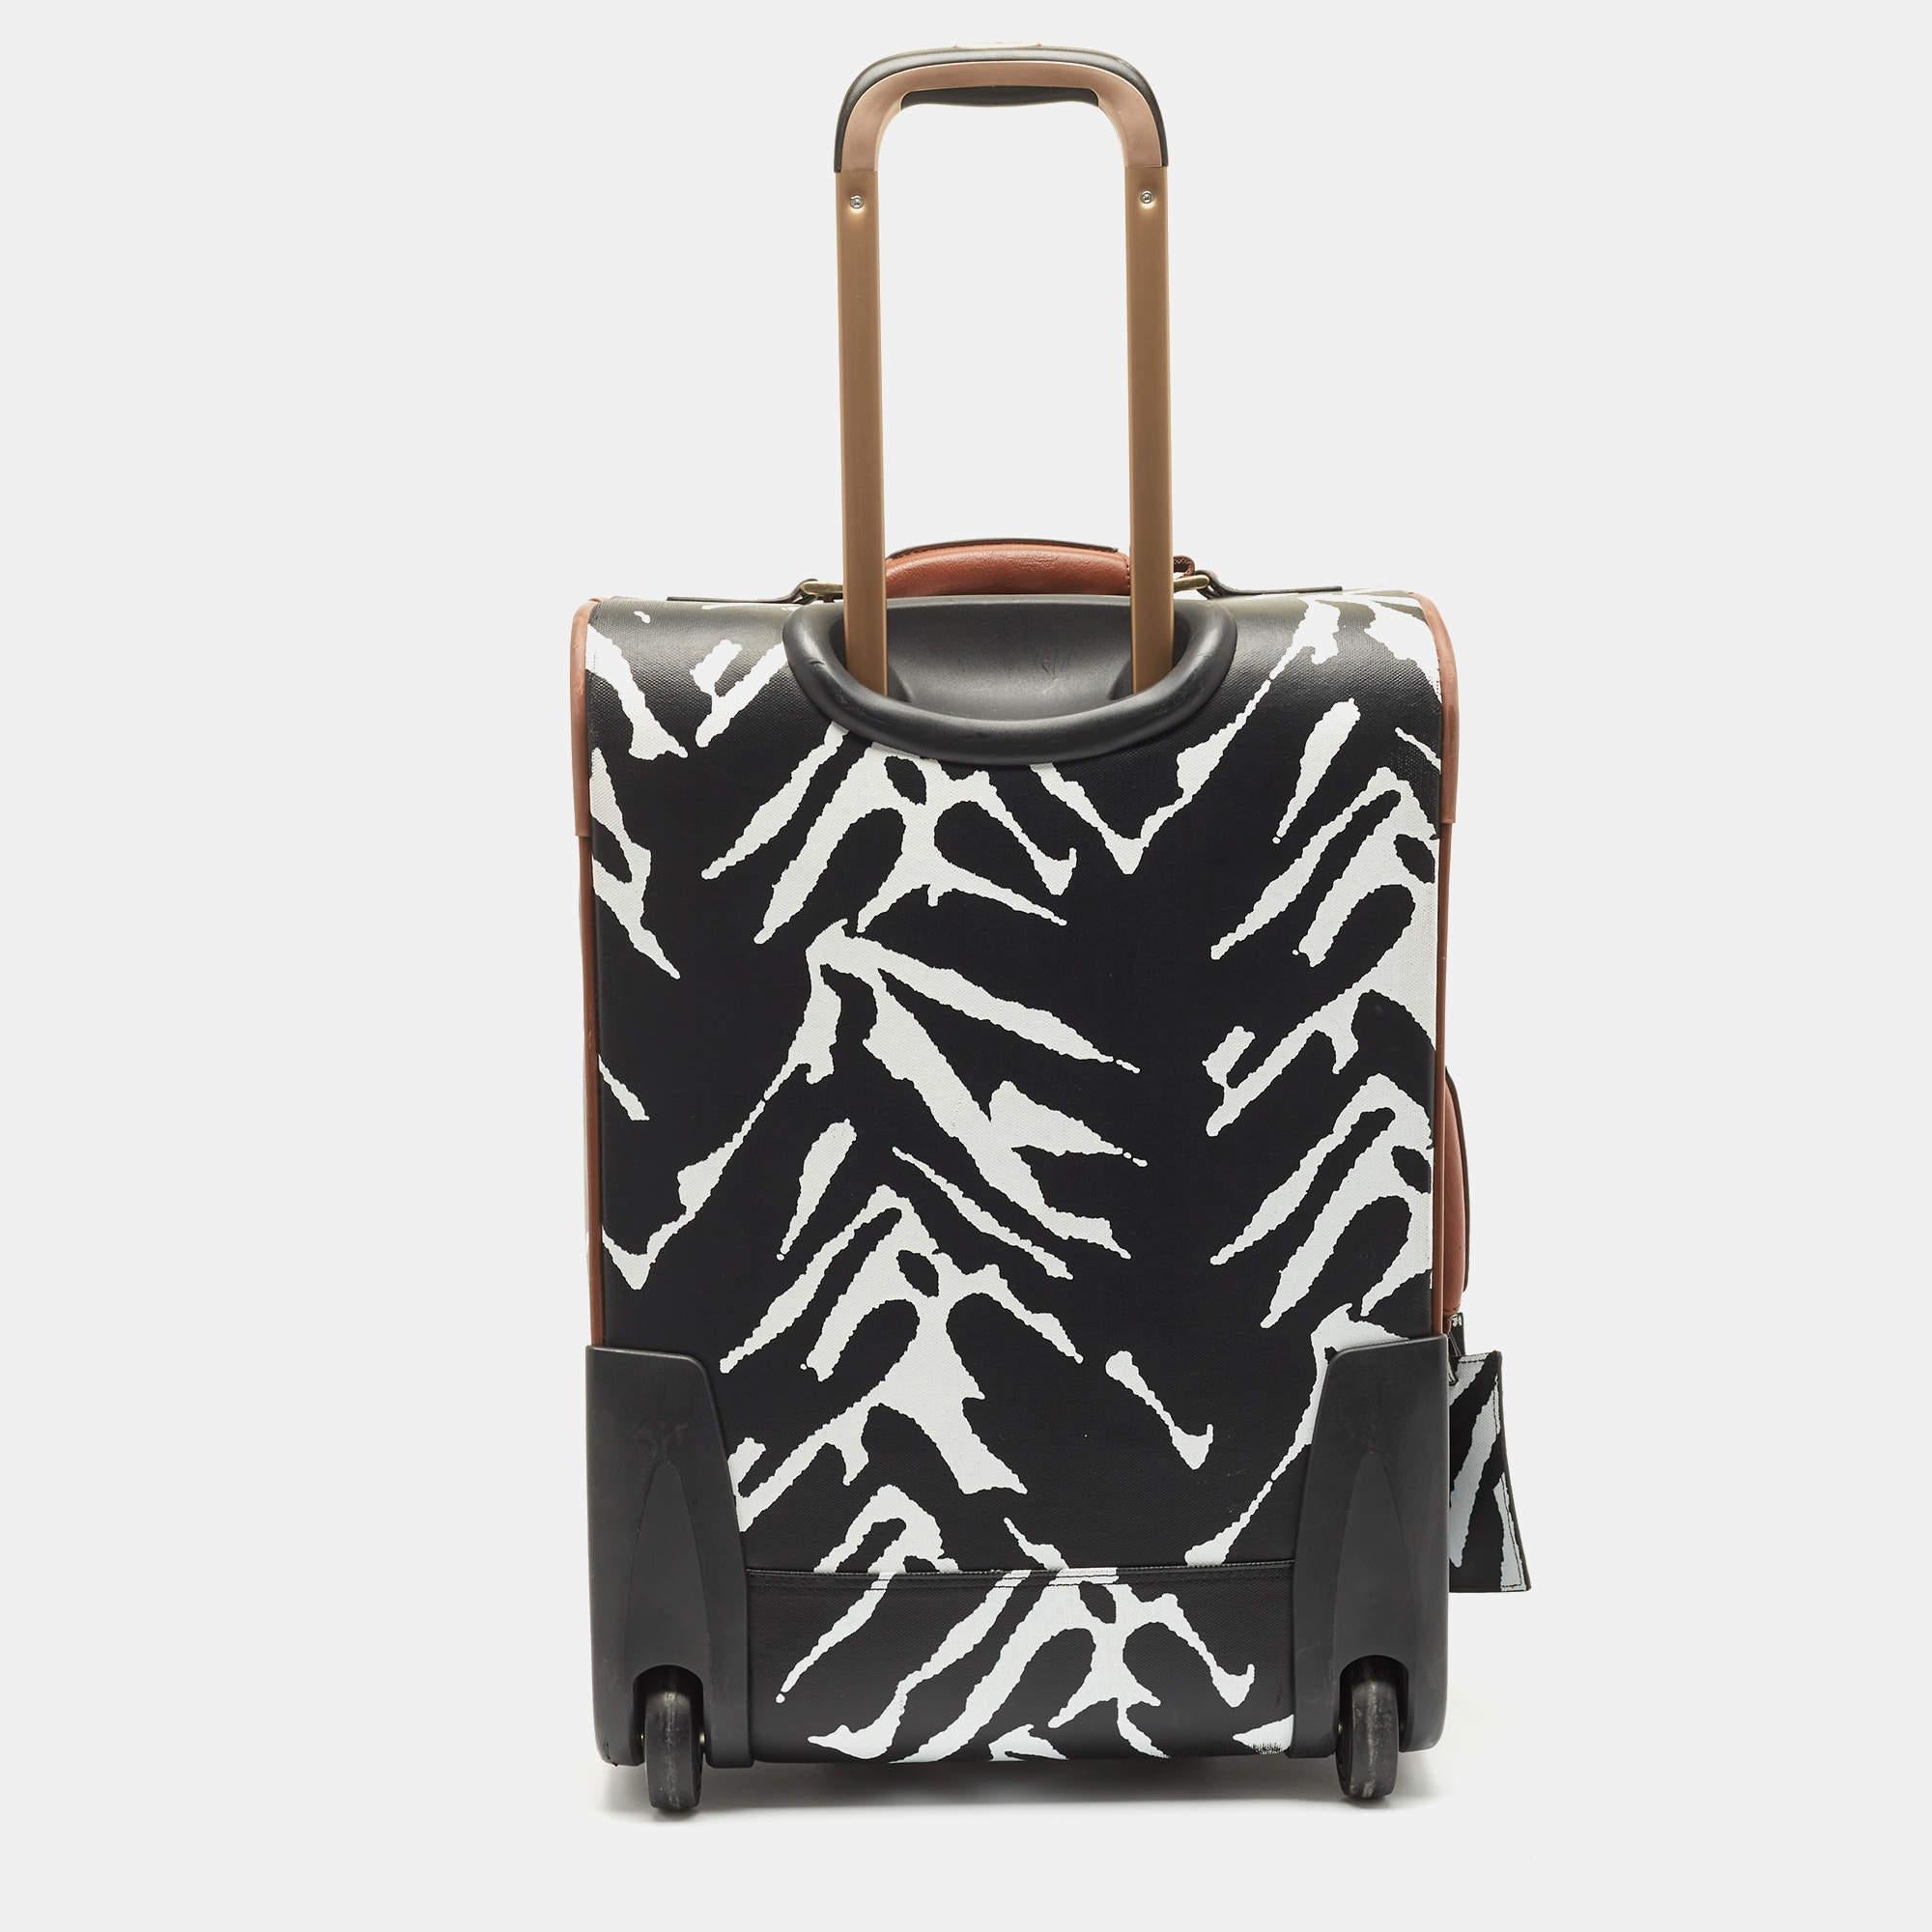 A traveling partner to trust and treasure is this one from Diane Von Furstenberg. The exterior has been crafted from zebra-print canvas while the spacious interior is lined with fabric. Equipped with handles and a telescopic handle, this luggage bag